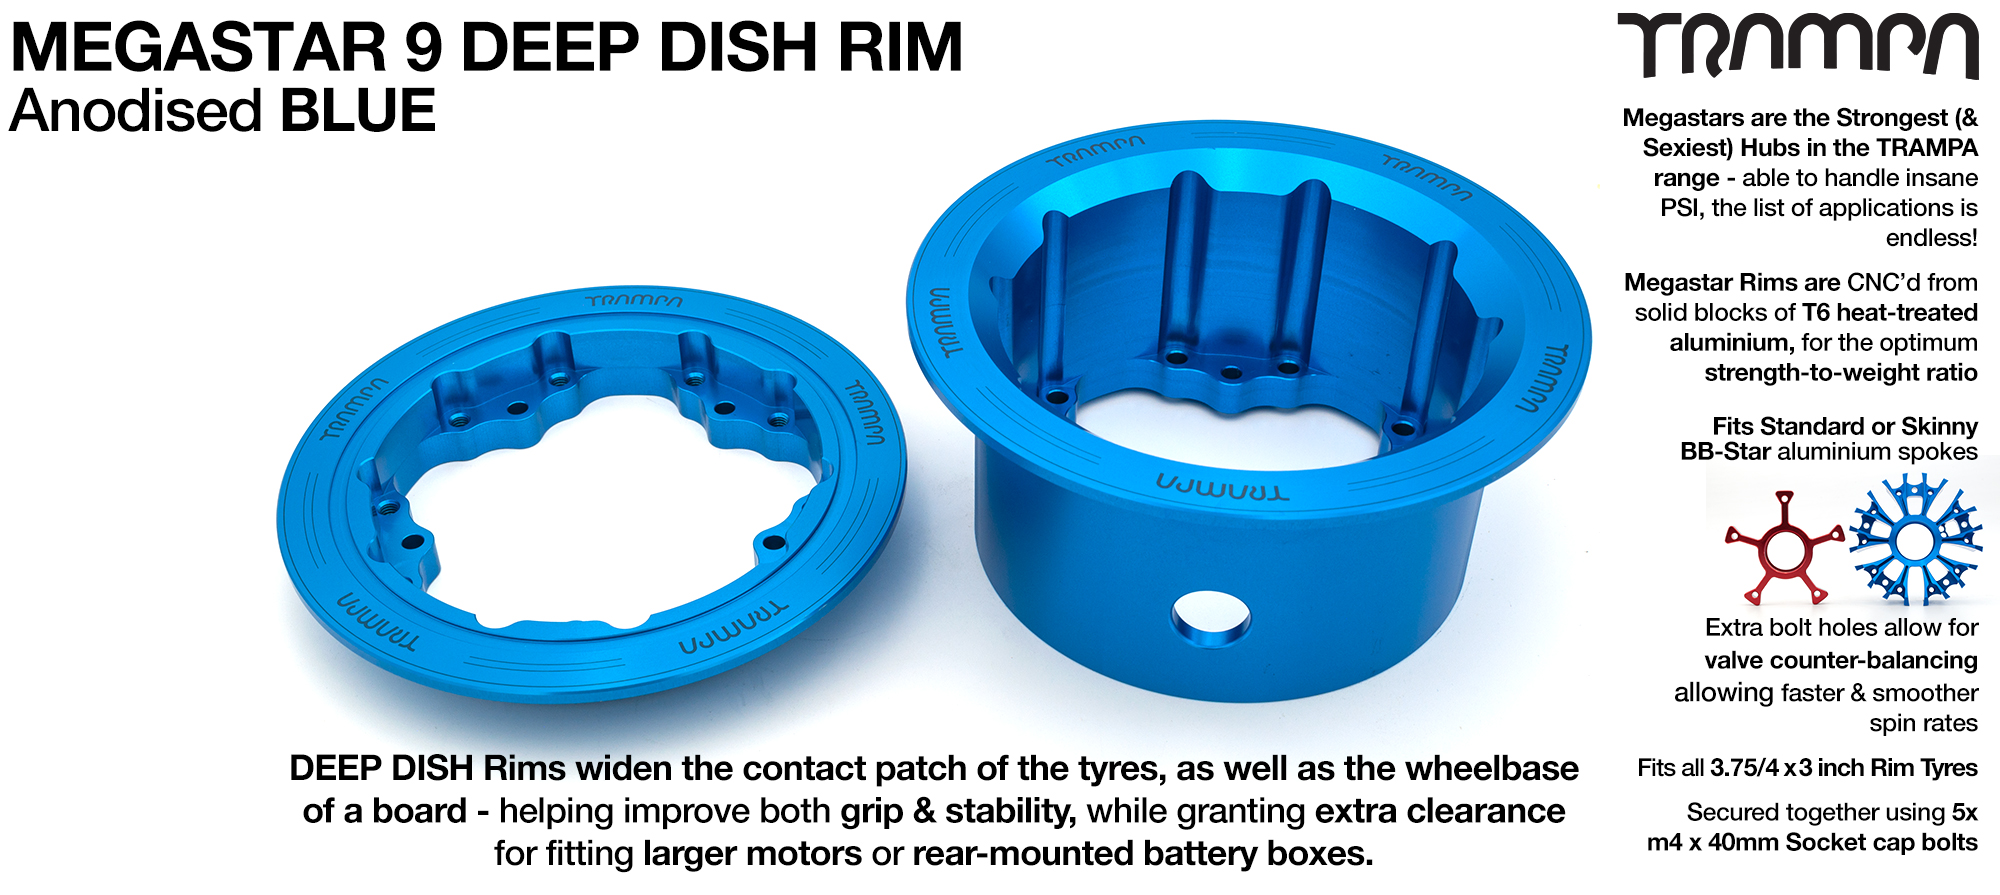 MEGASTAR 9 DEEP-DISH Rims Measure 3.75/4x 3 Inch. The Bearings are positioned OFF-SET & accept 4 Inch Rim Tyres to make 9 or 10 inch Wheels - BLUE